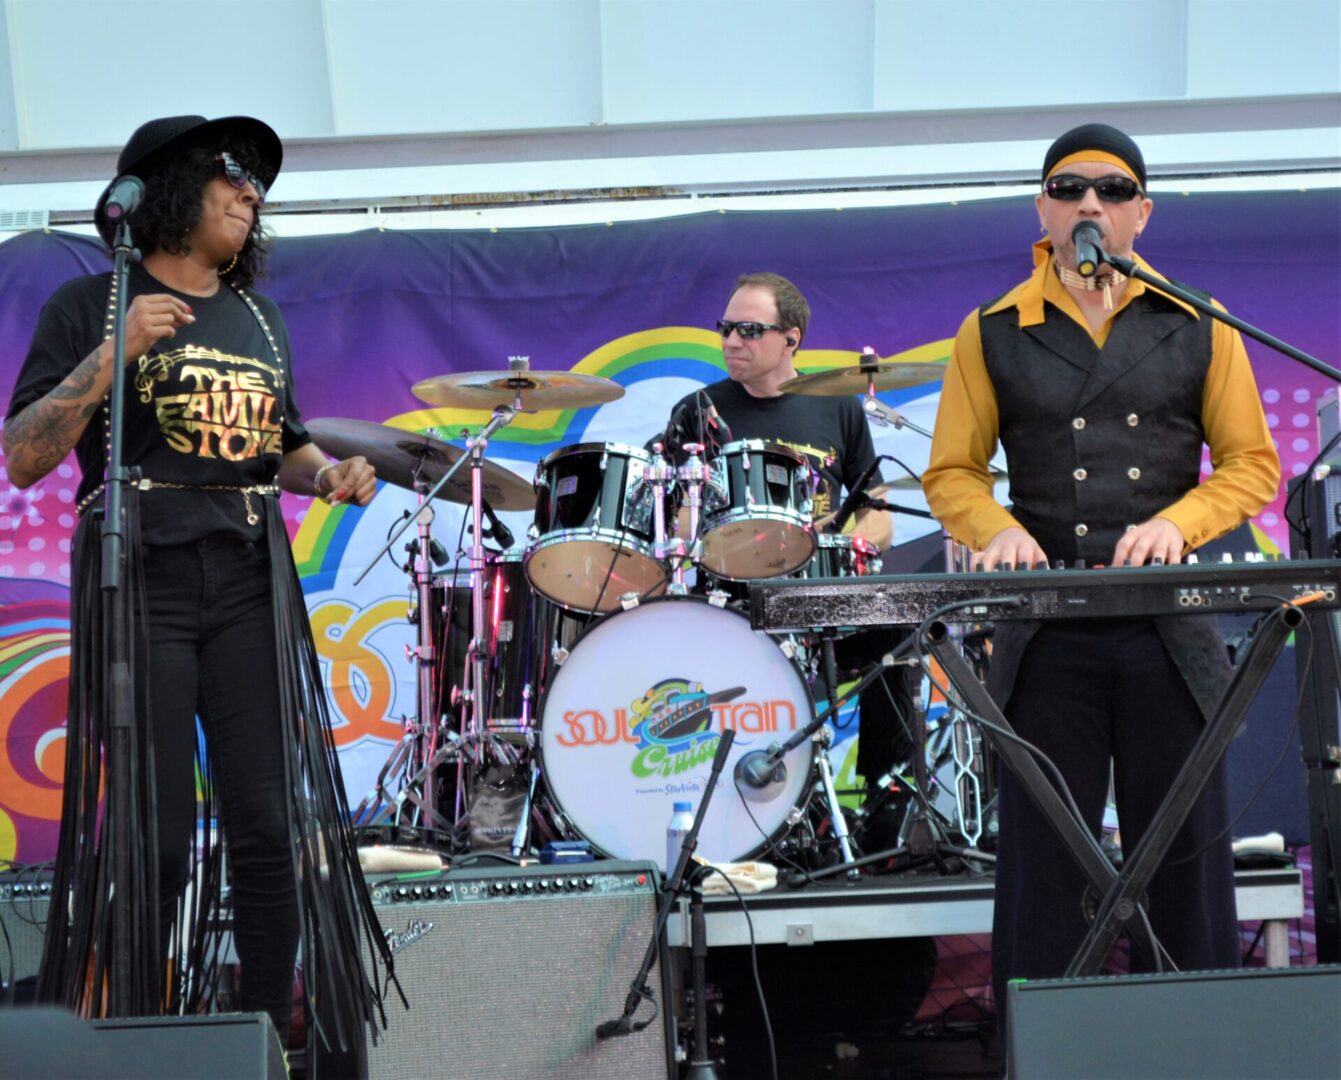 A band performing on stage with a rainbow background.